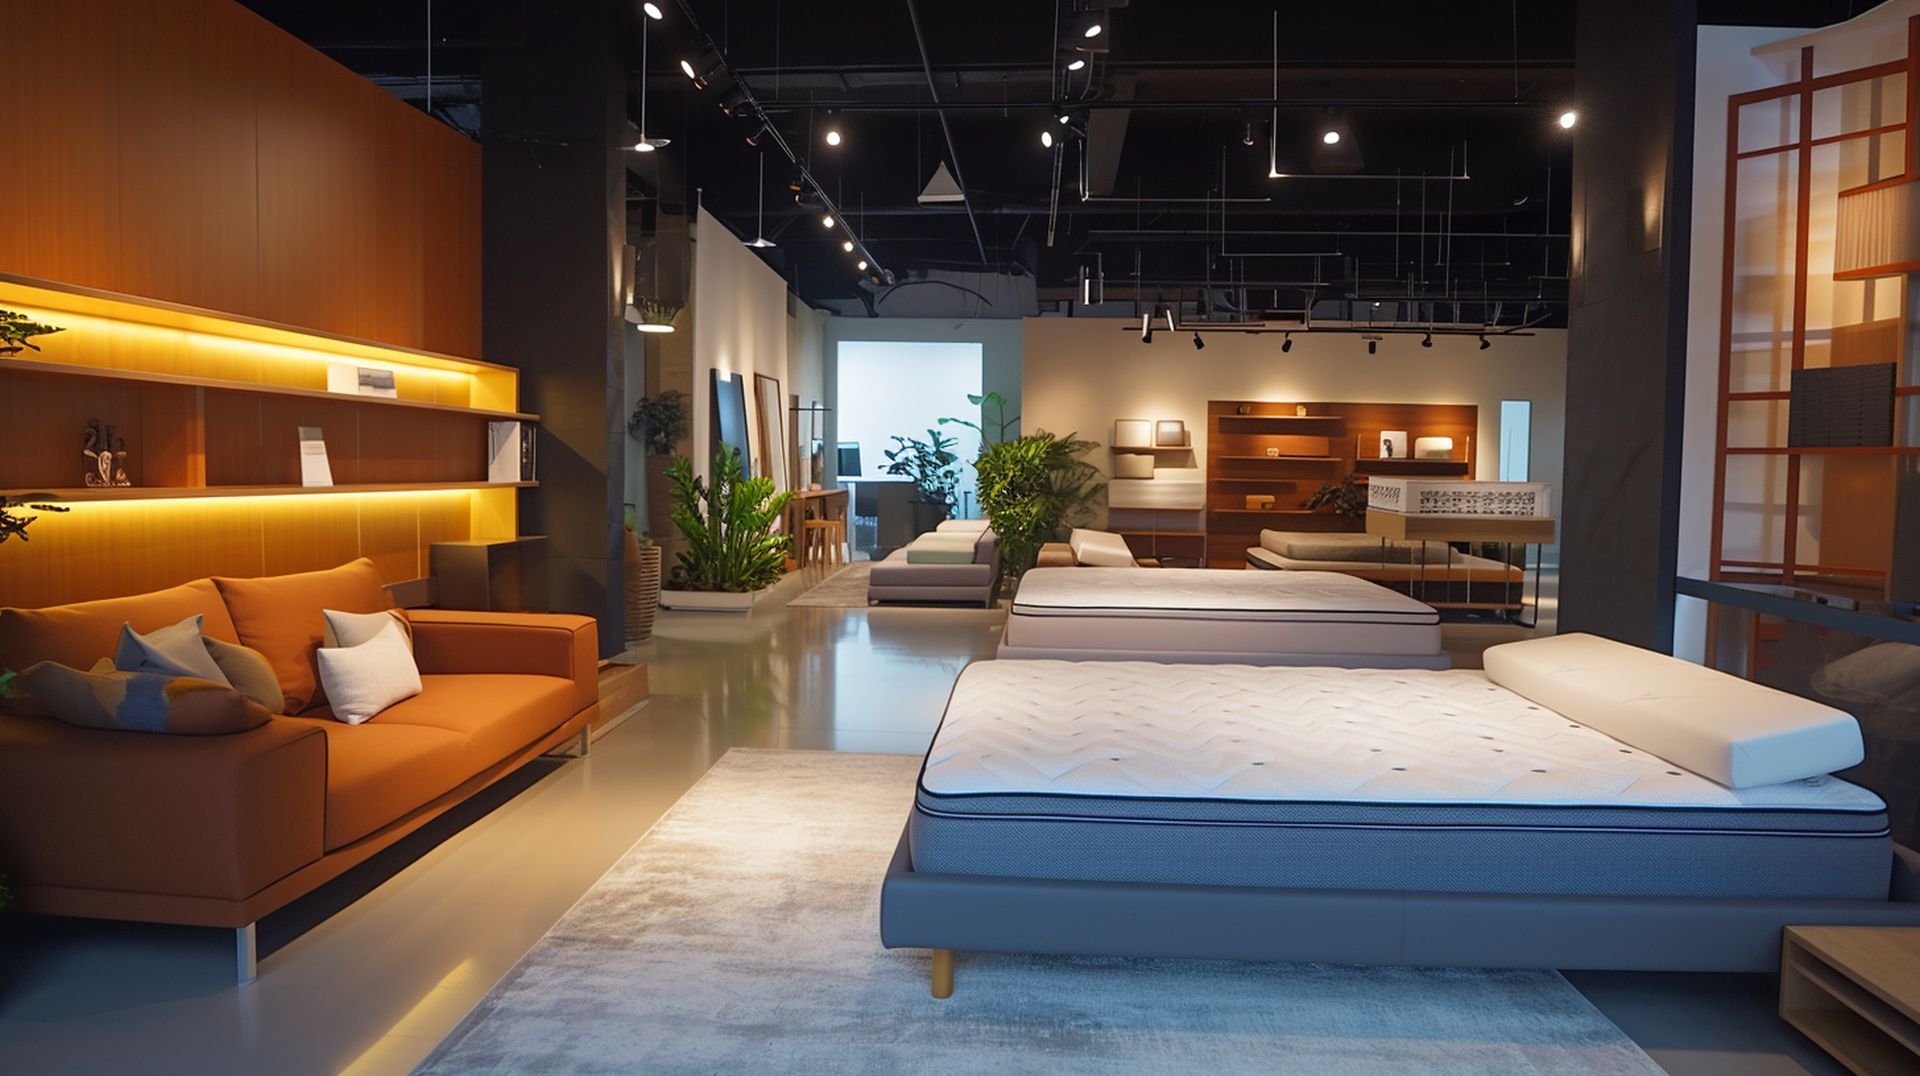 If you're looking for a new bed, mattress stores in Middletown offer the best customer and delivery service, financing, and warranties in Connecticut